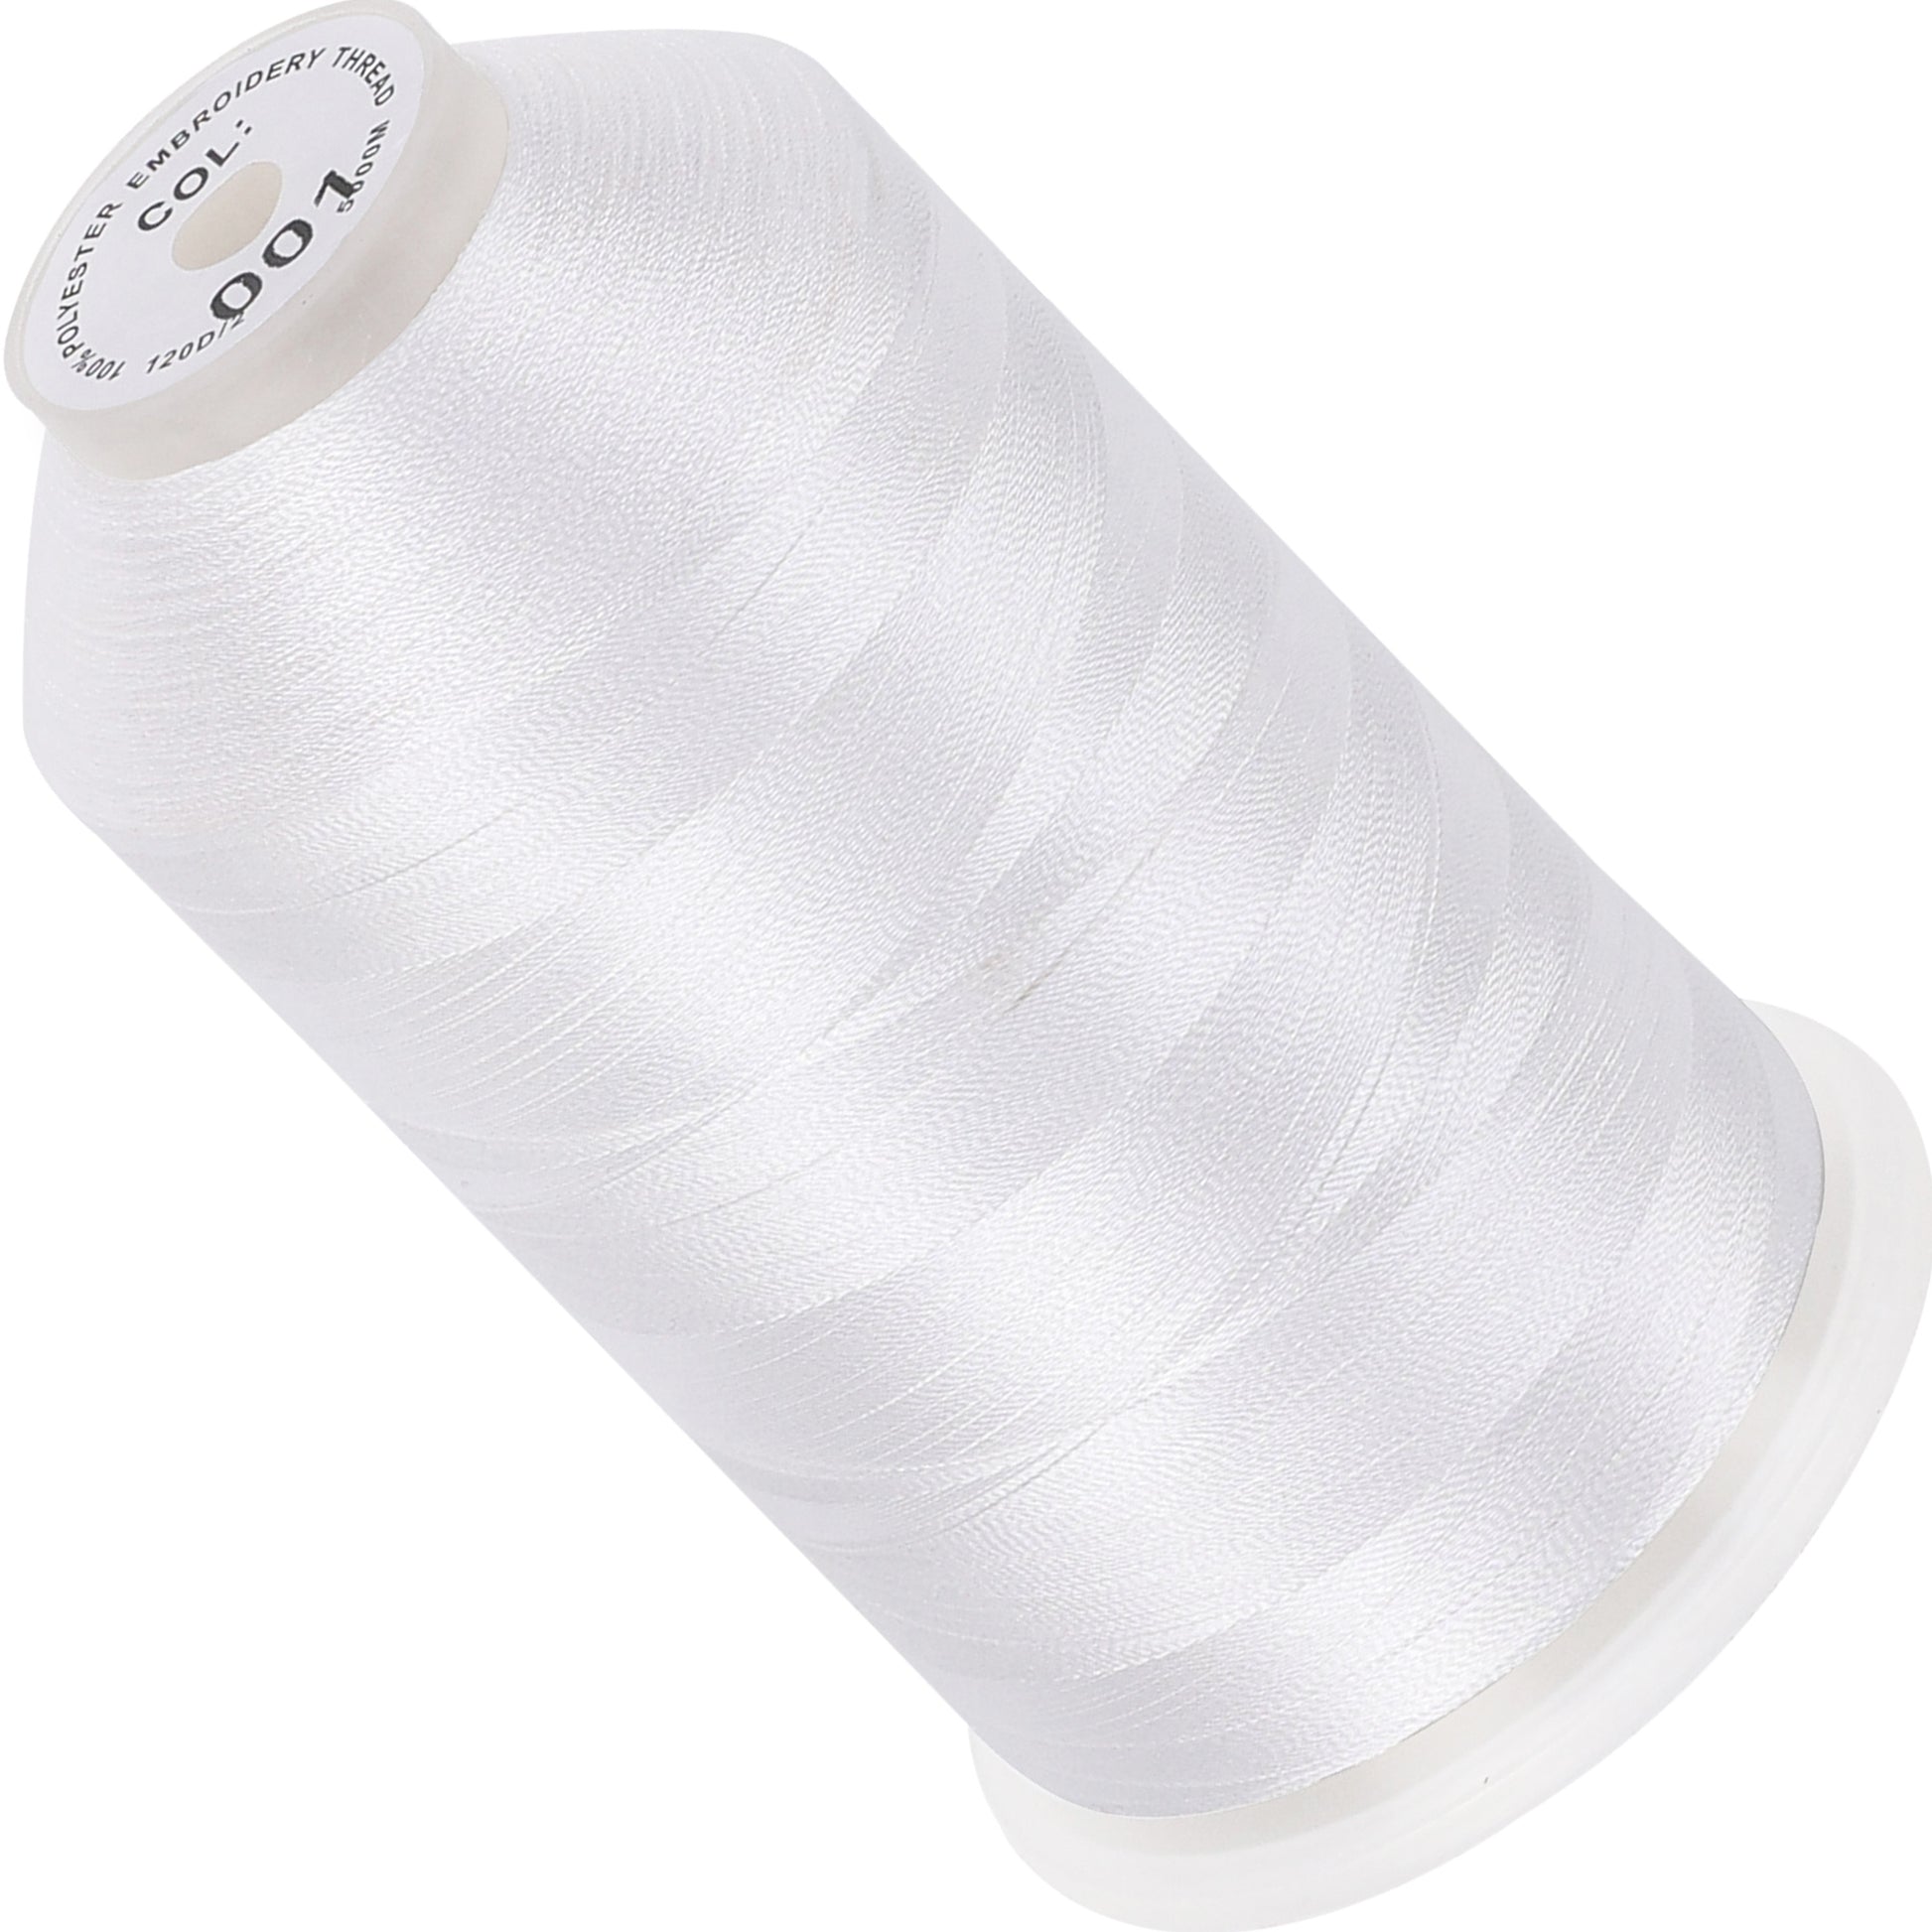 New brothread - 2 Huge Spools 5000M Each Polyester Embroidery Machine  Thread 40WT for Commercial and Domestic Machines - White White-001